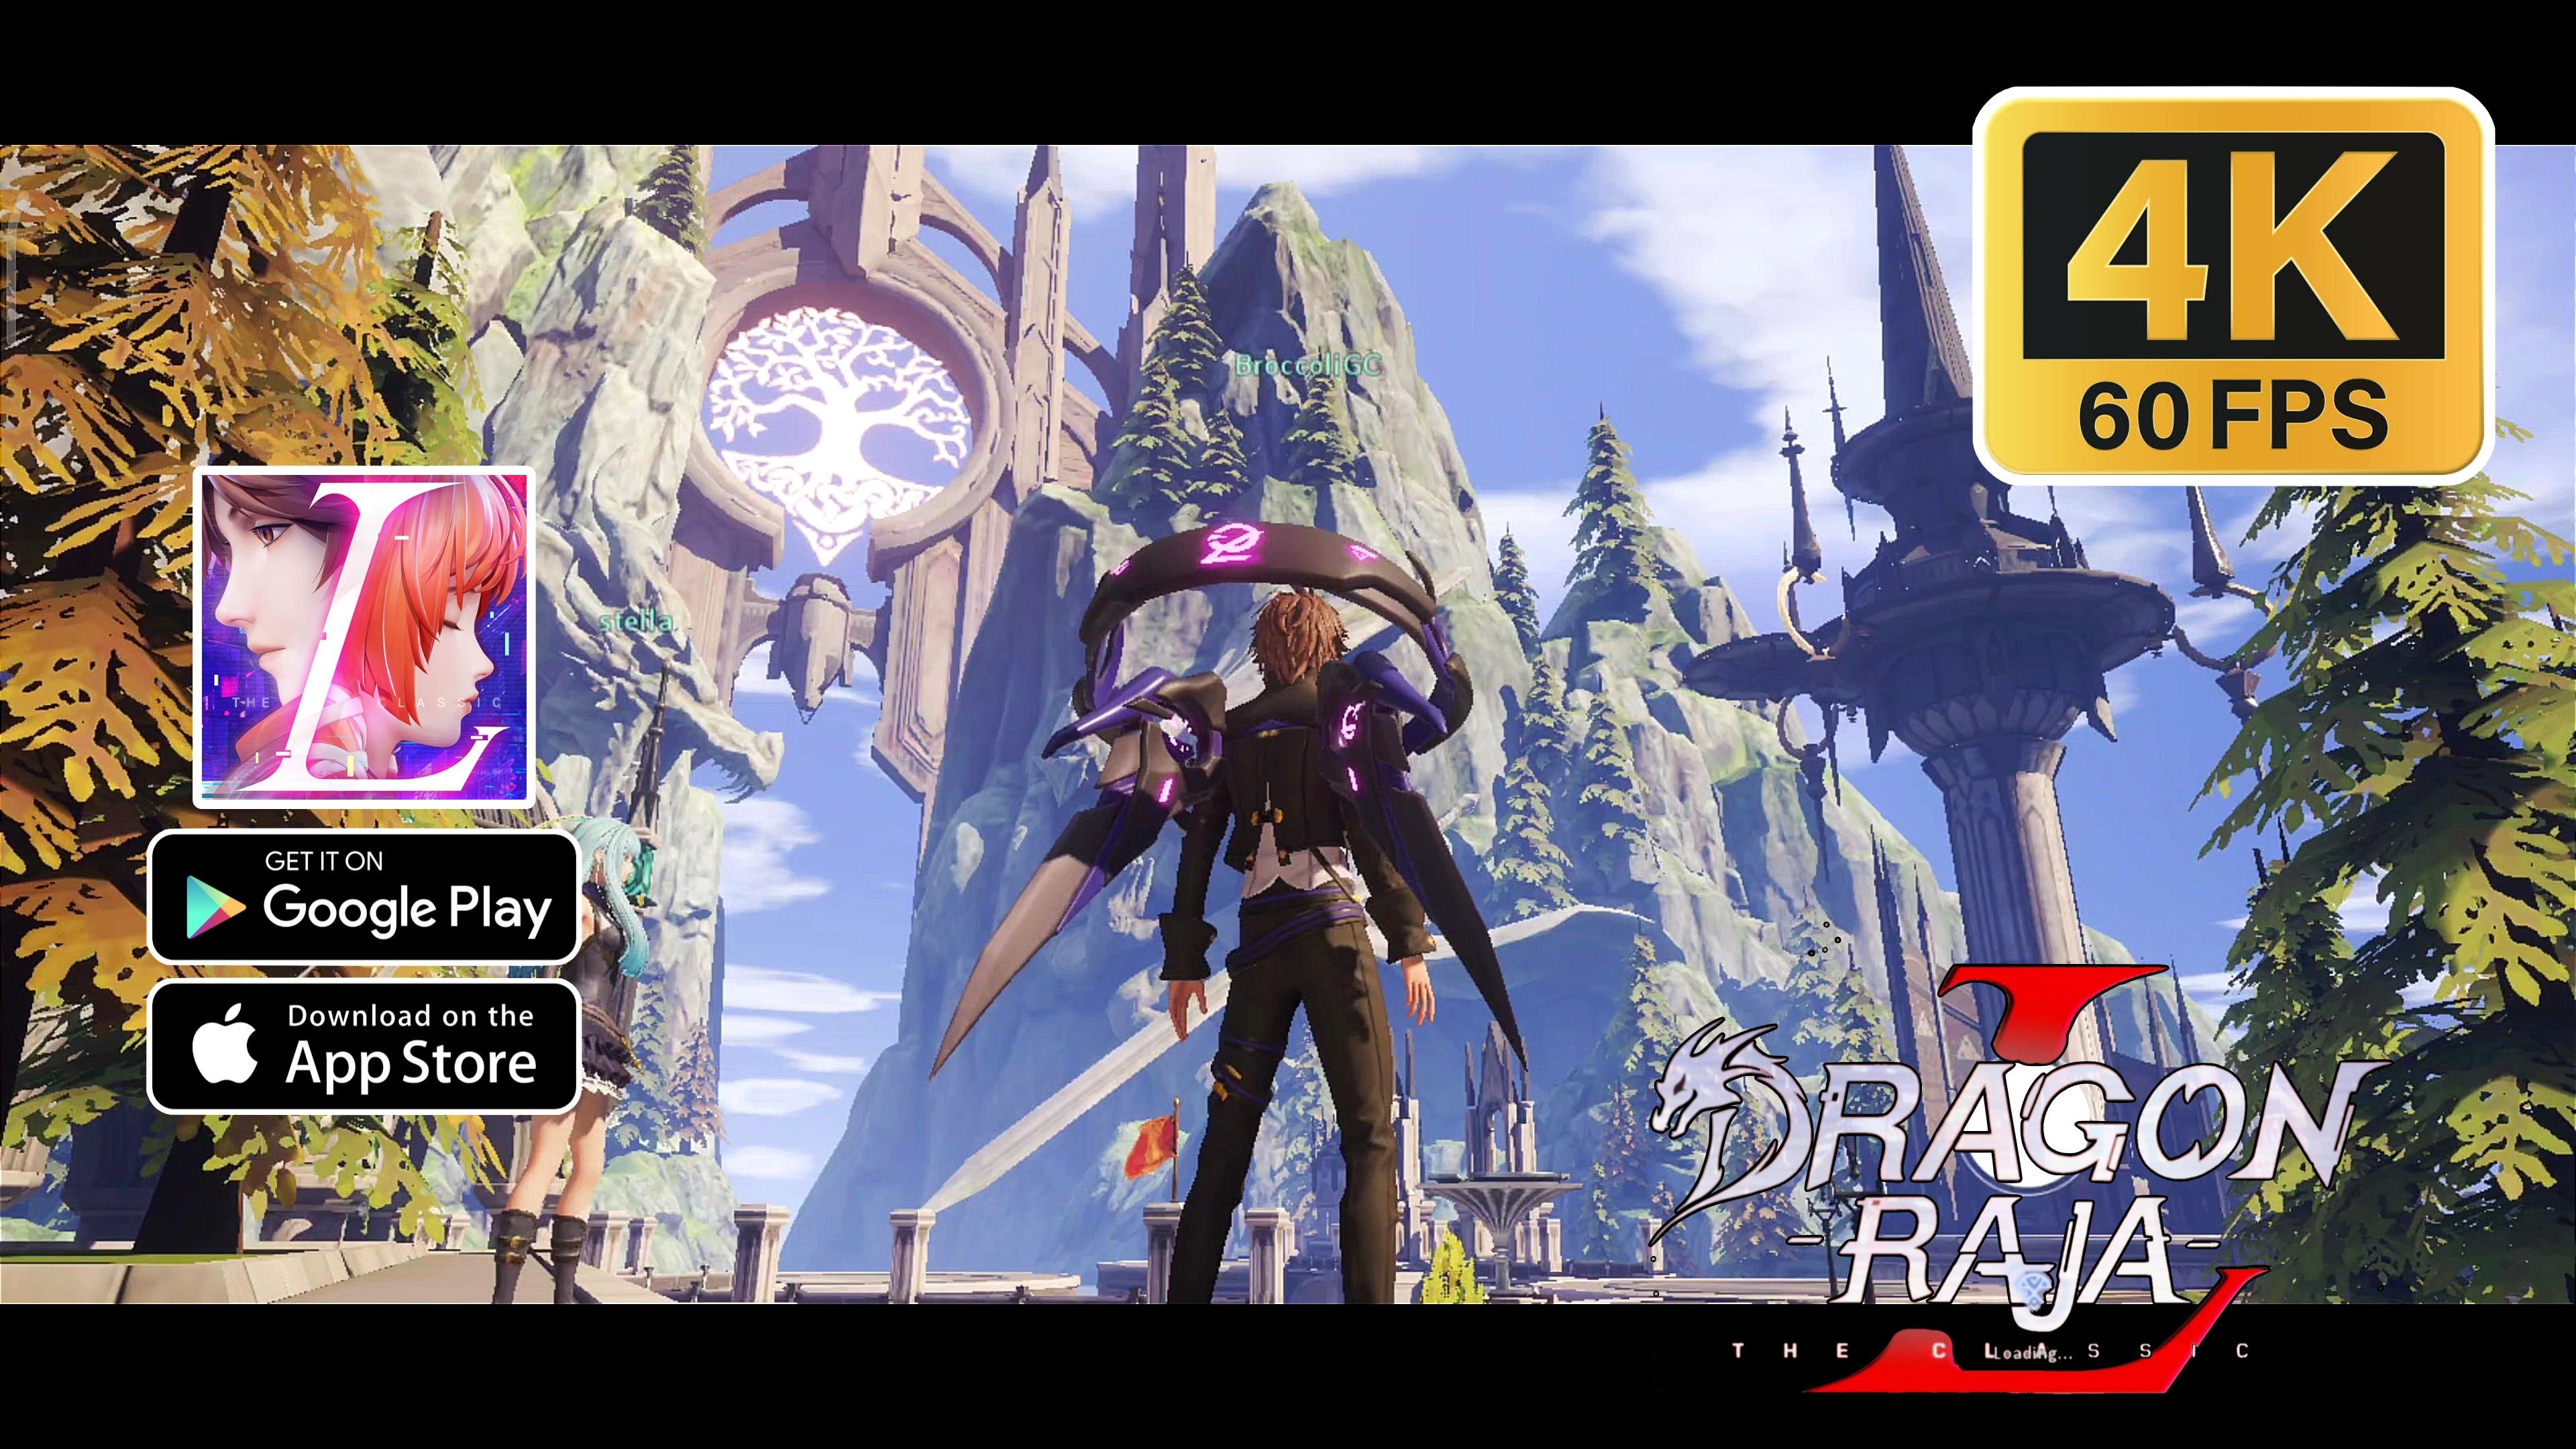 Dragon Raja in 2022  Is It Worth Playing? MMORPG Review 